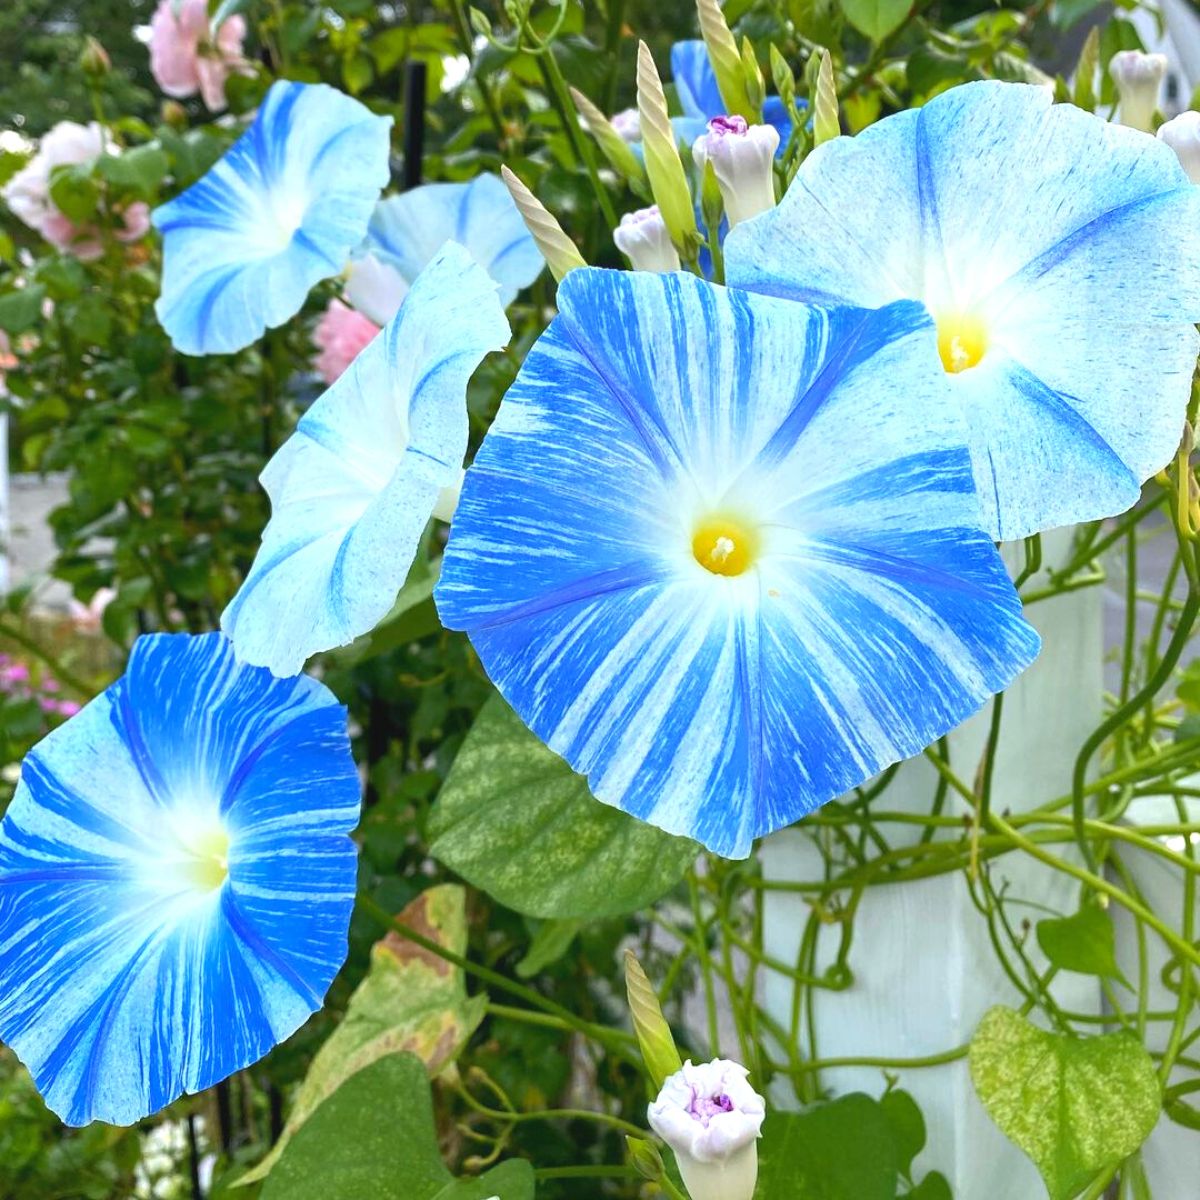 Sky blue morning glory flowers in a patio